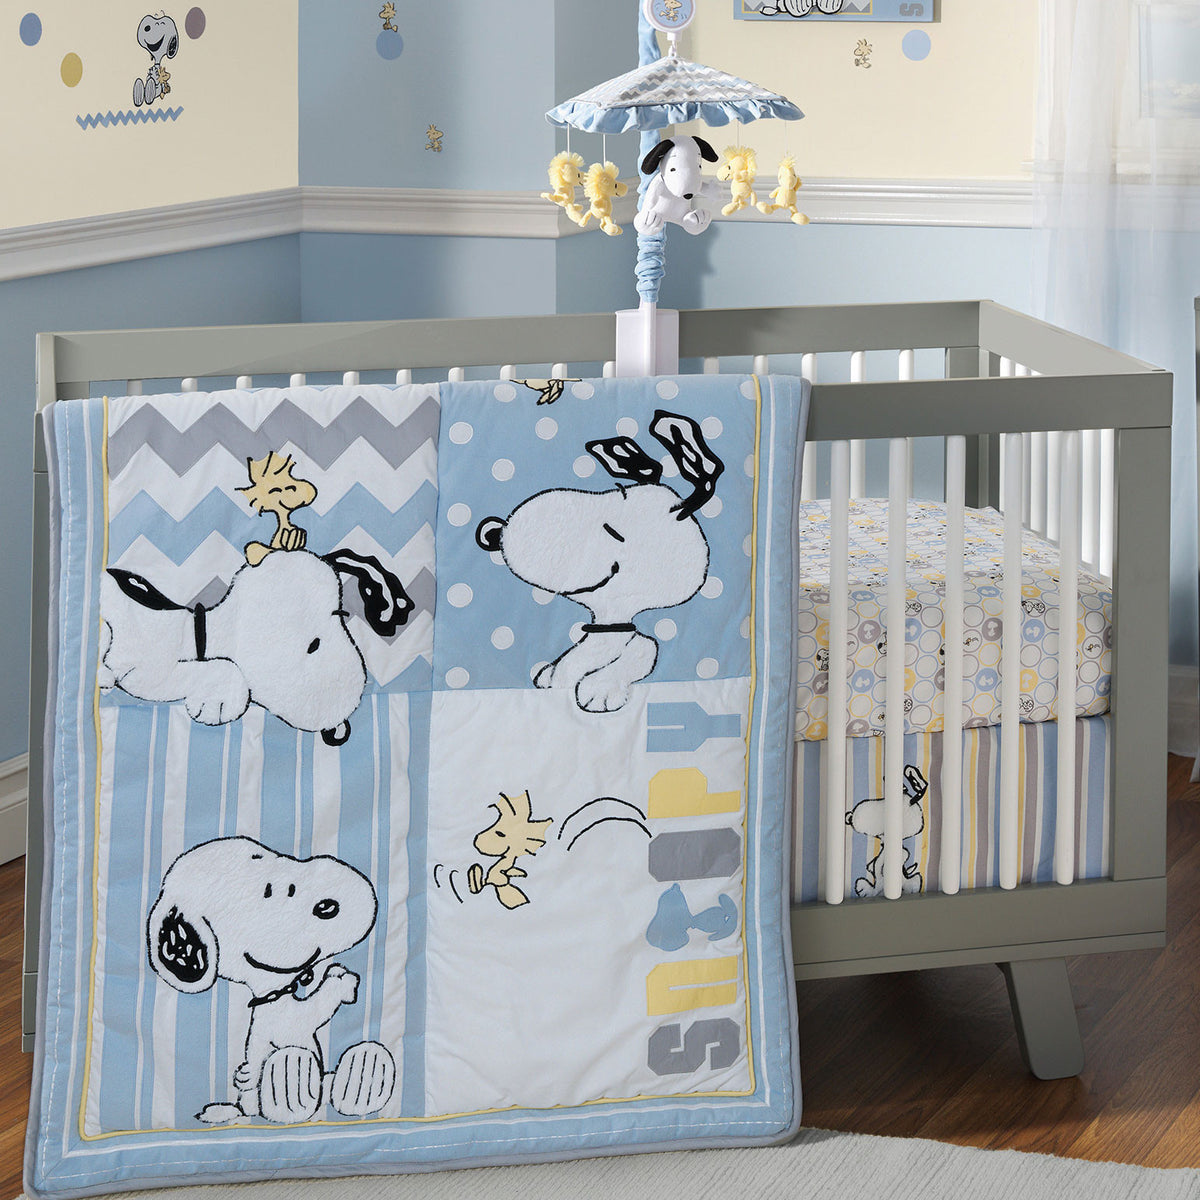 Lambs & Ivy My Little Snoopy & Woodstock Blue/Yellow/Gray Wall Decals/Appliques 578048